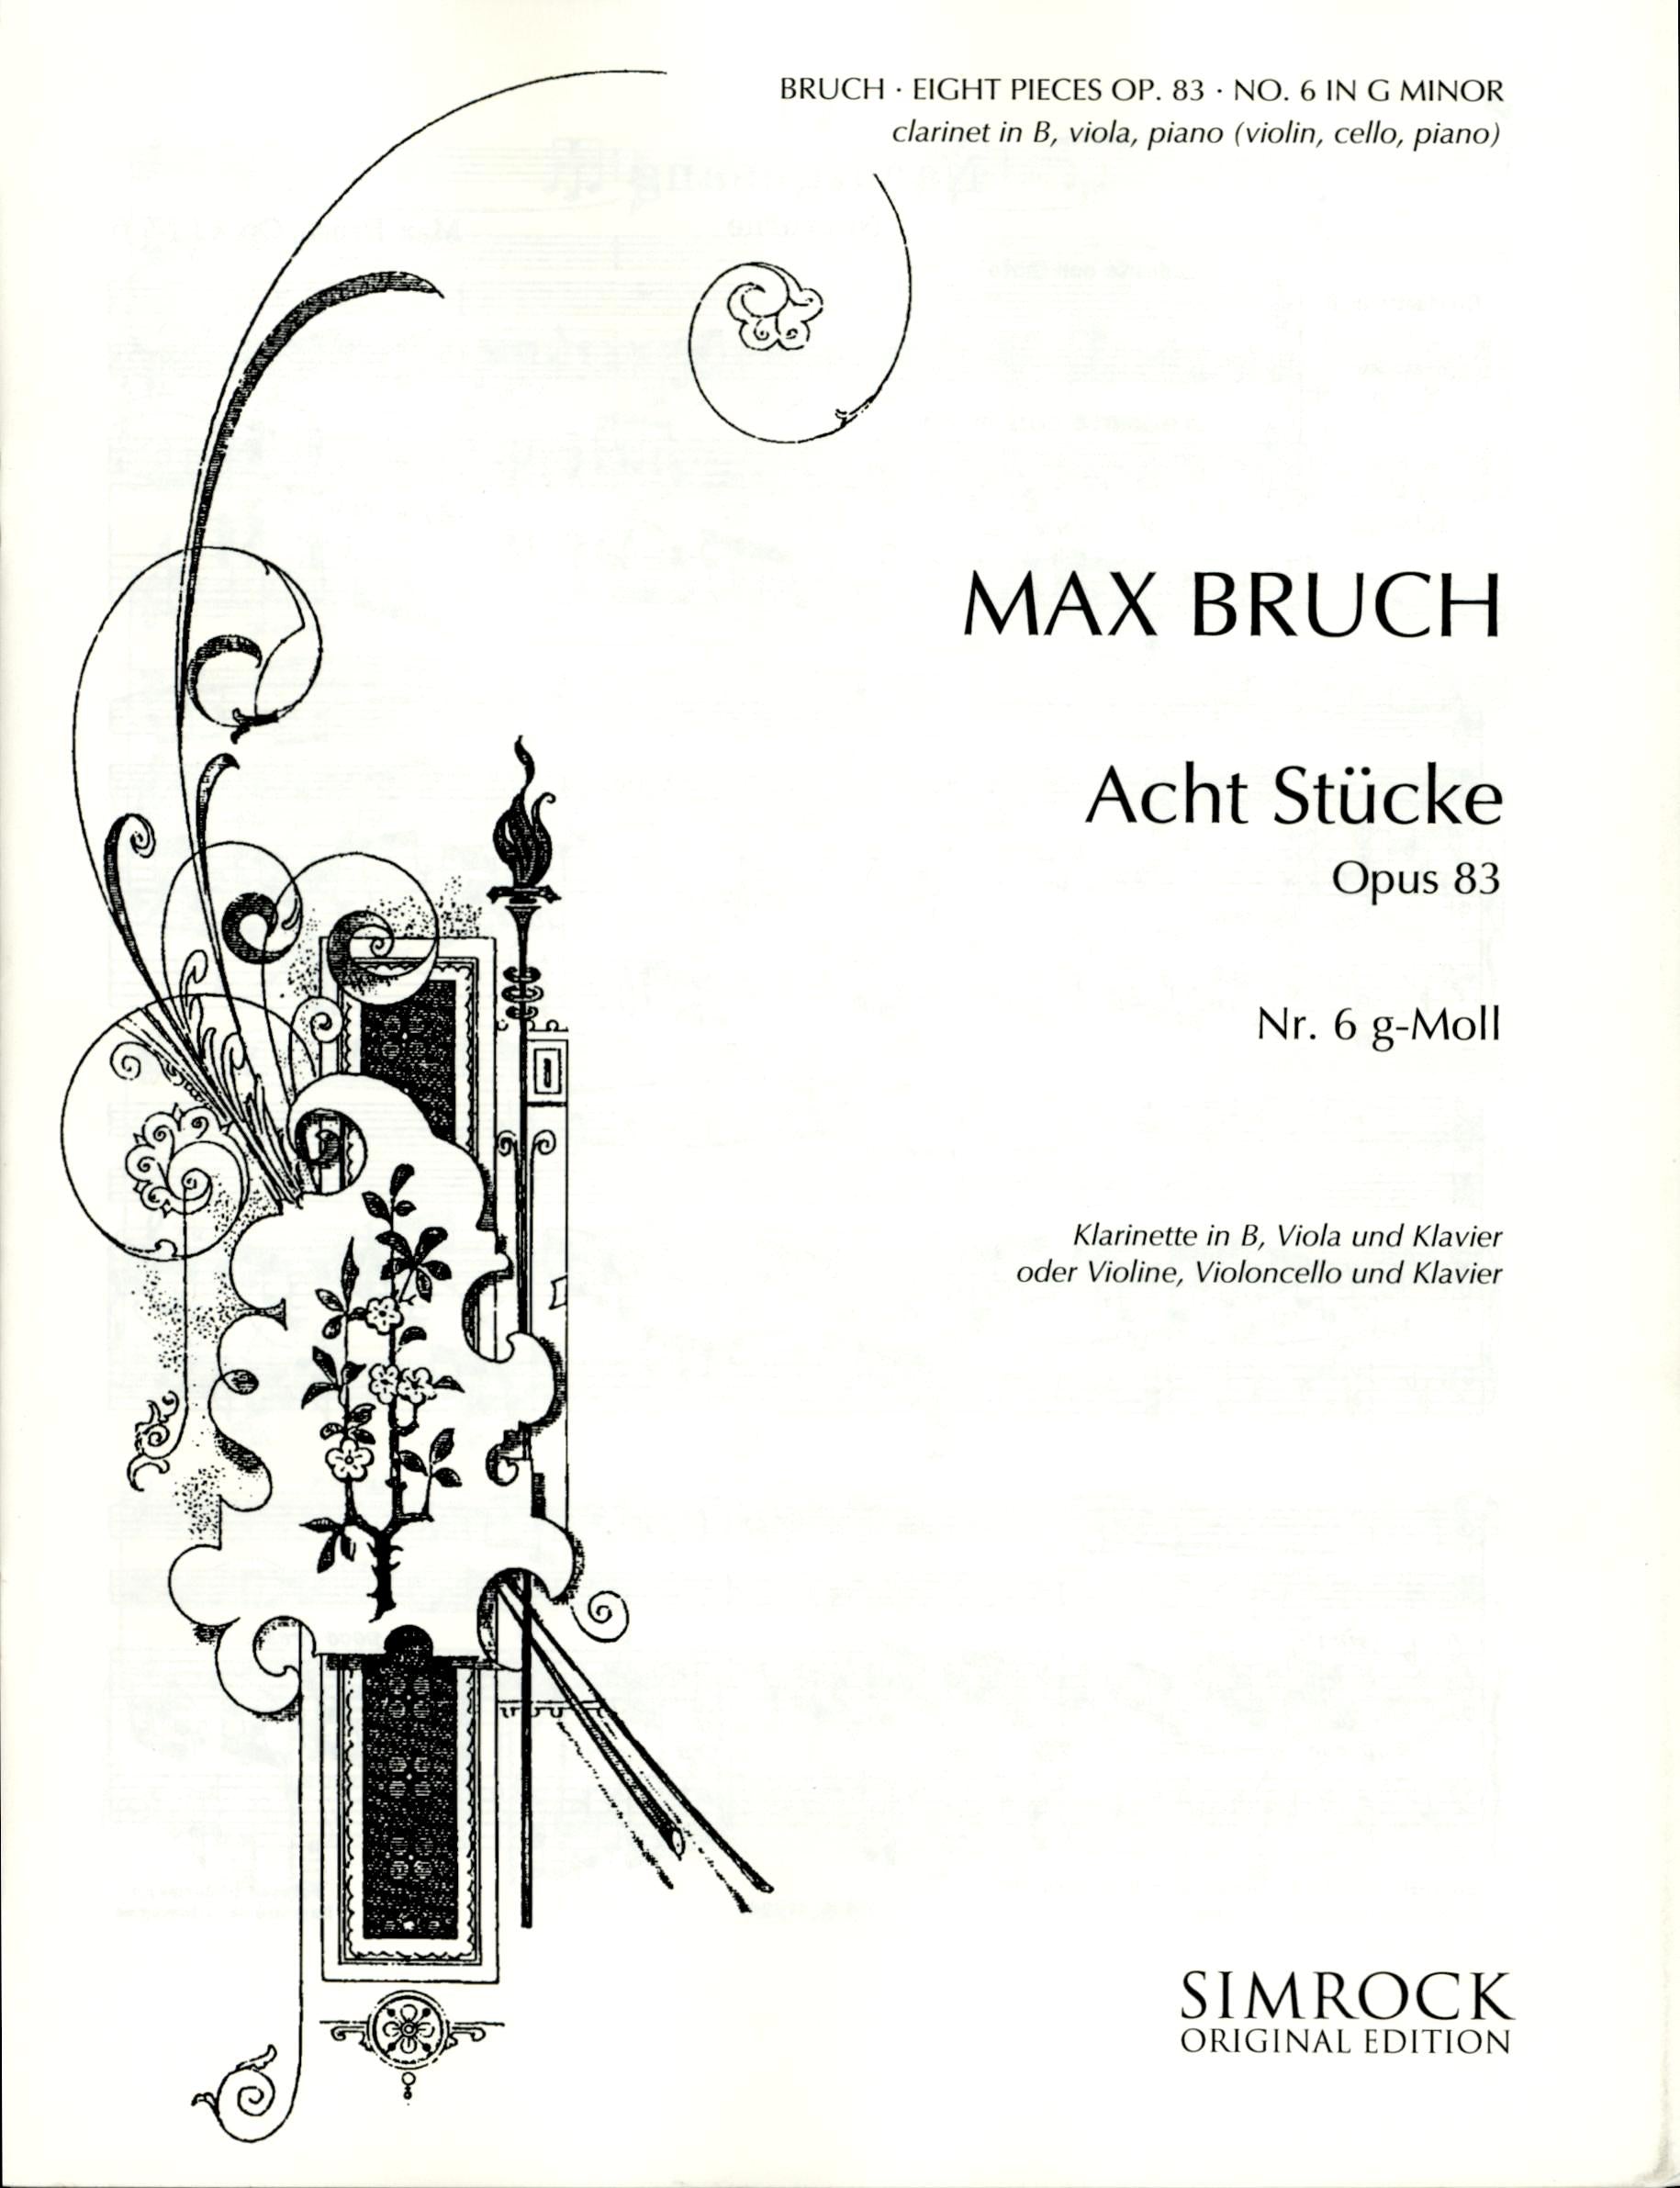 Bruch: Eight Pieces, Op. 83, No. 6